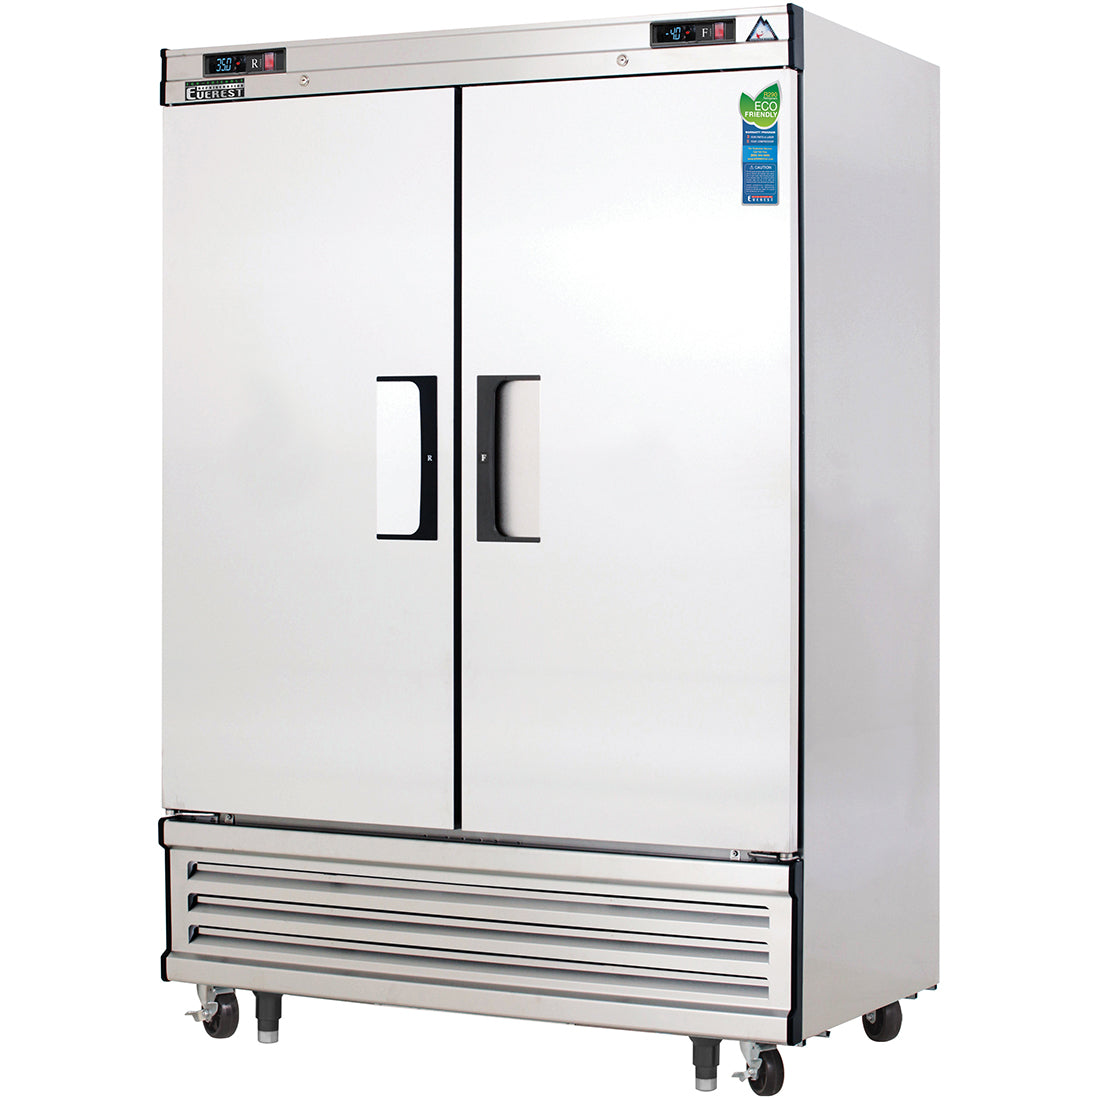 Everest EB Series-EBRF2 Two Section Solid Door Upright Reach-In Dual Temp Refrigerator/Freezer Combo